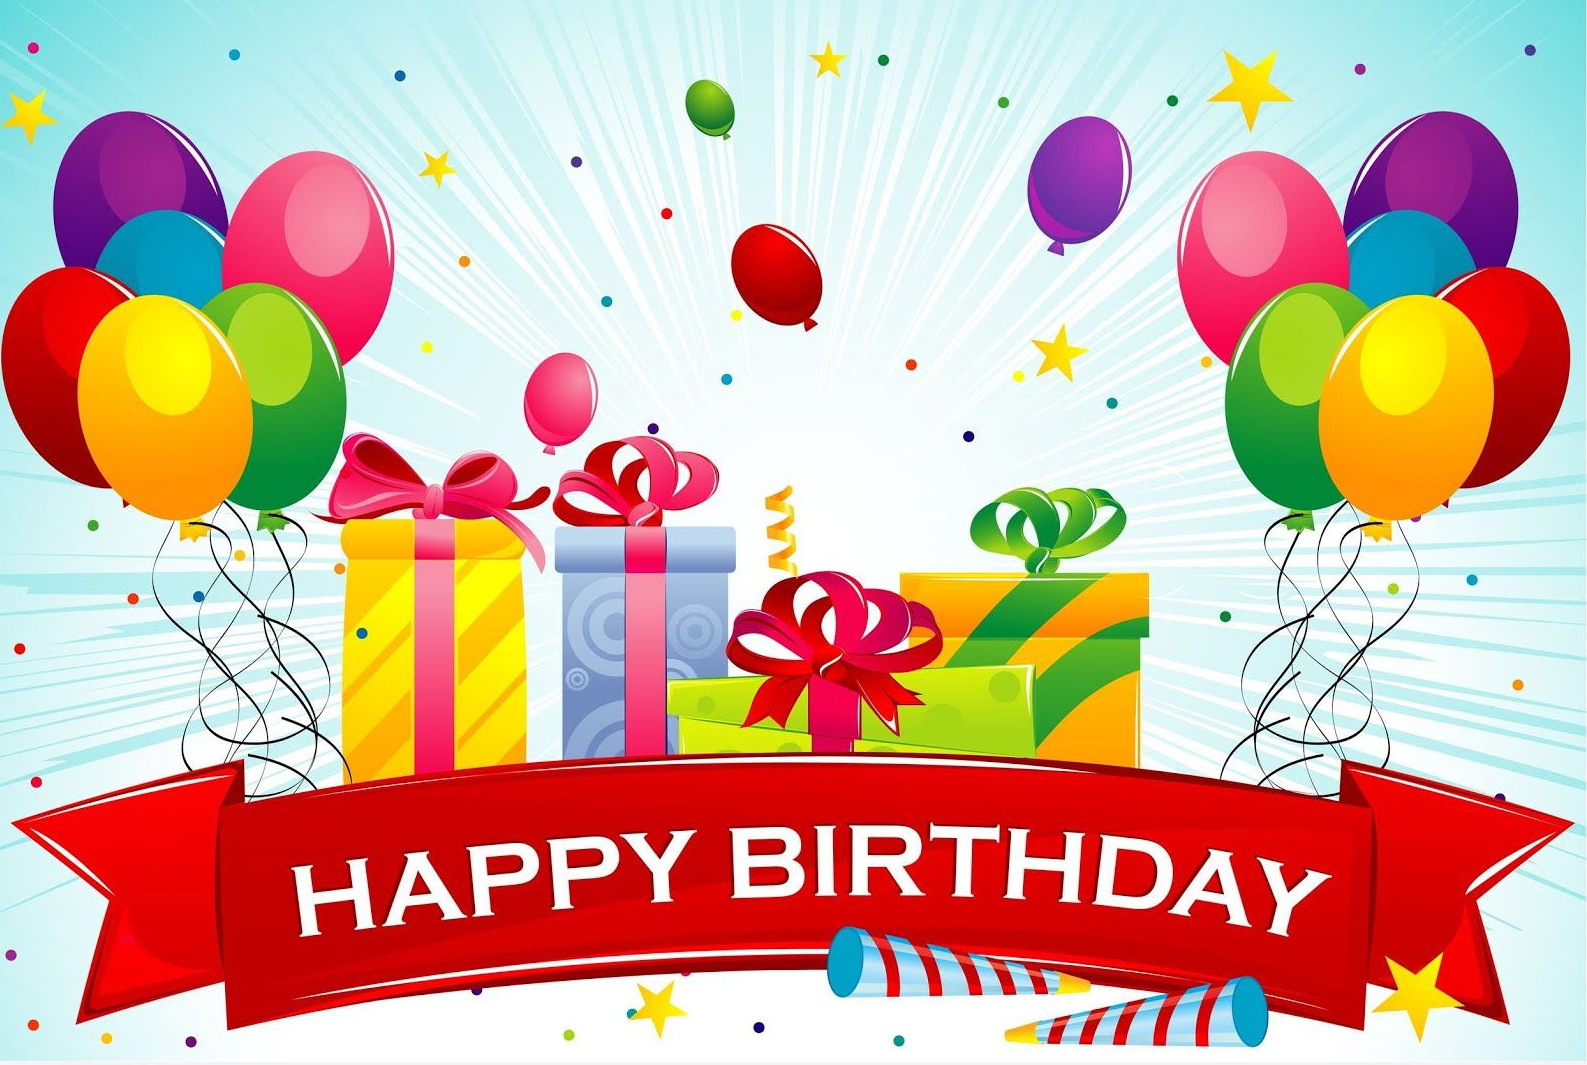 Birthday Card Greetings
 35 Happy Birthday Cards Free To Download – The WoW Style